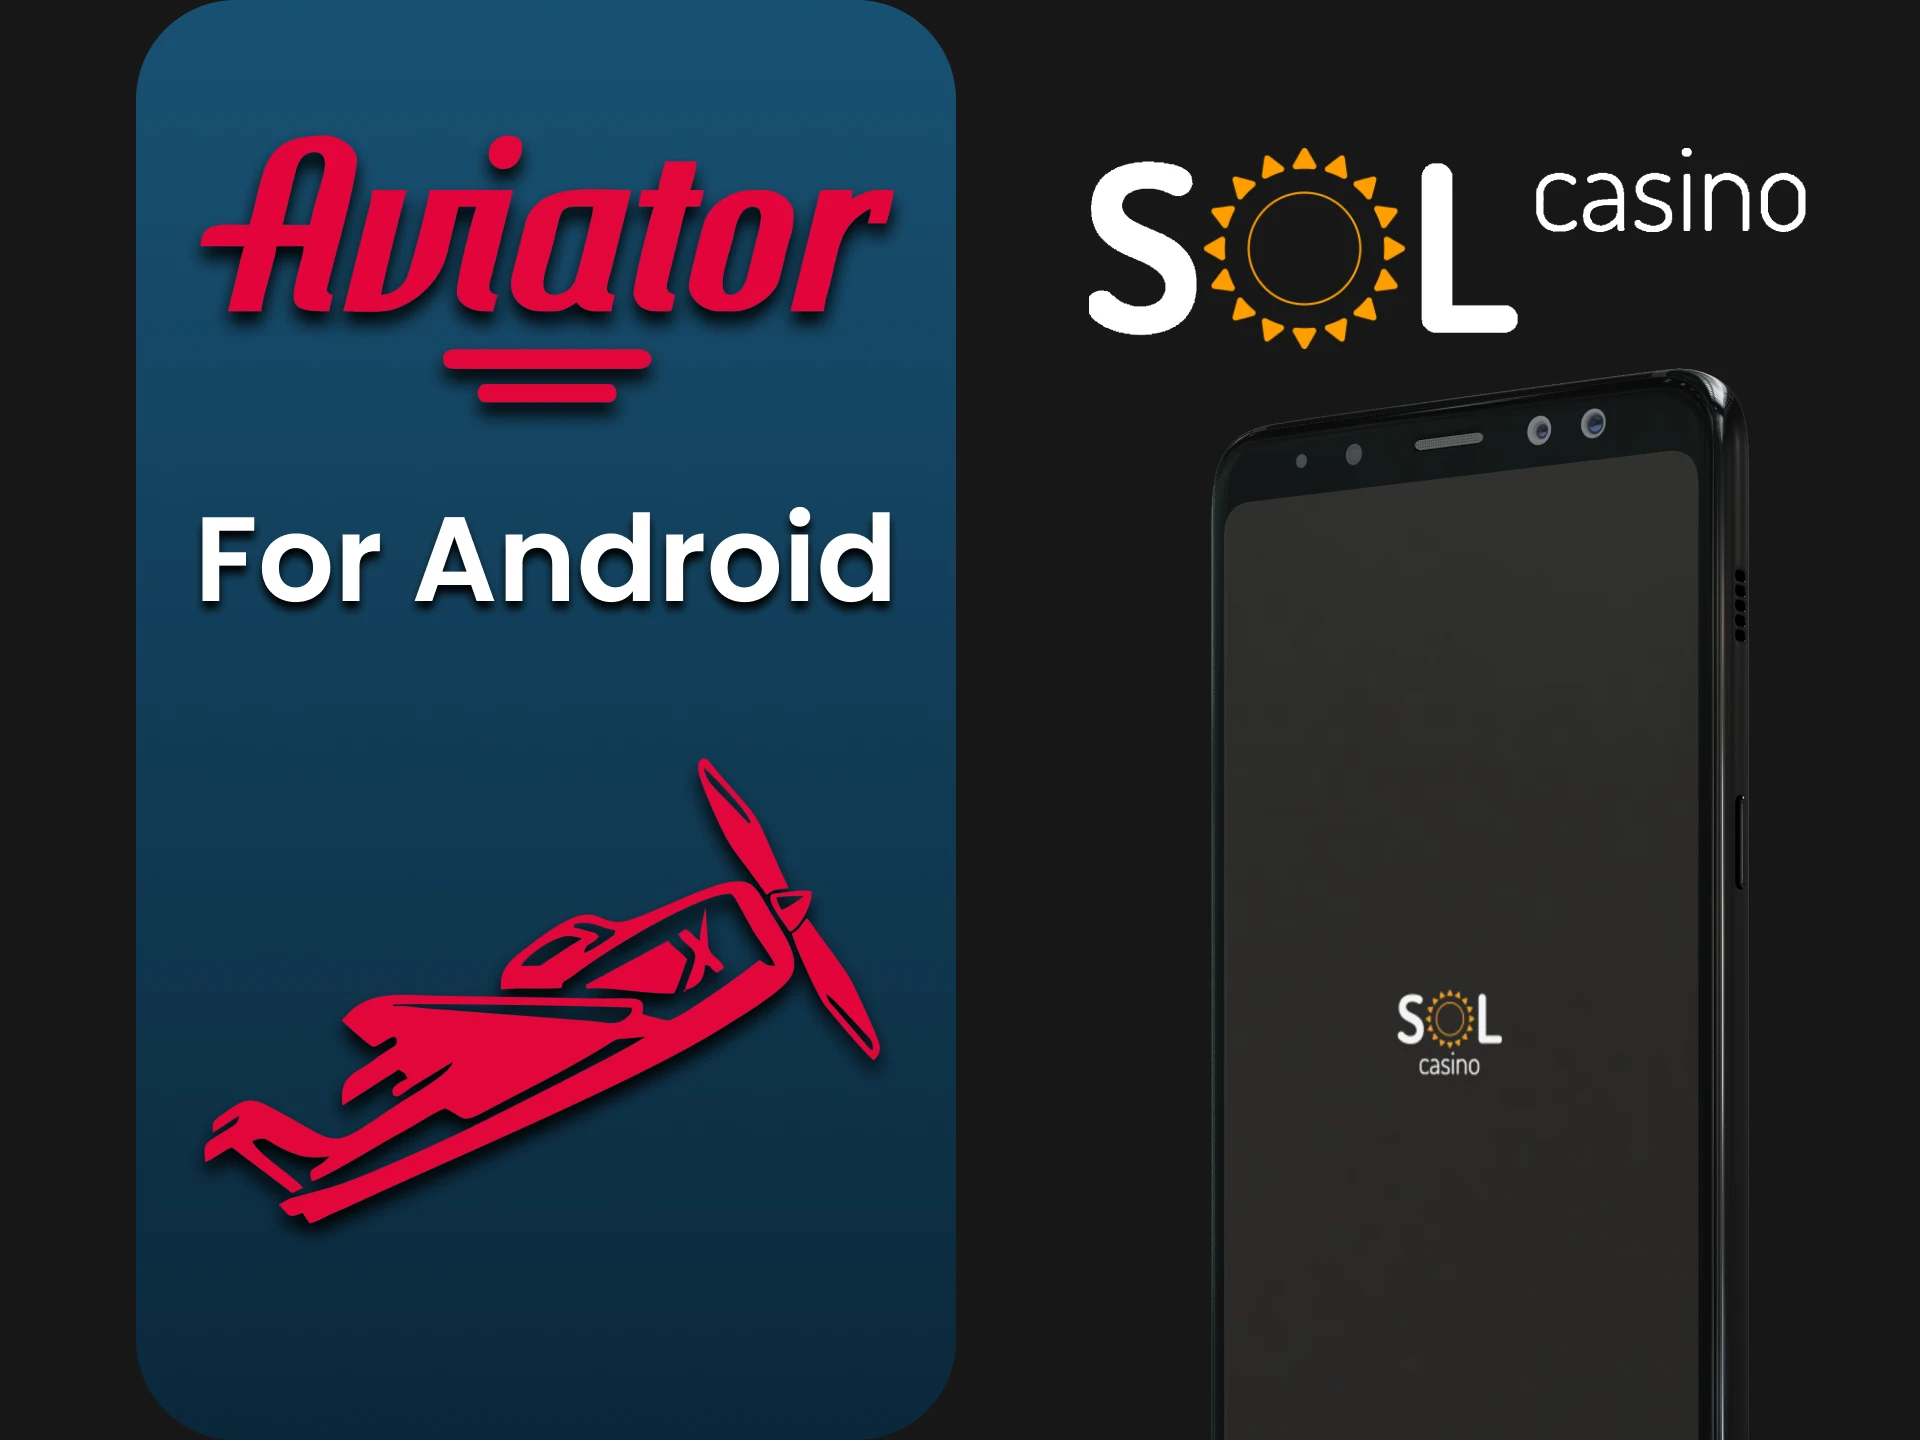 Download the Sol Casino app to play Aviator on Android.